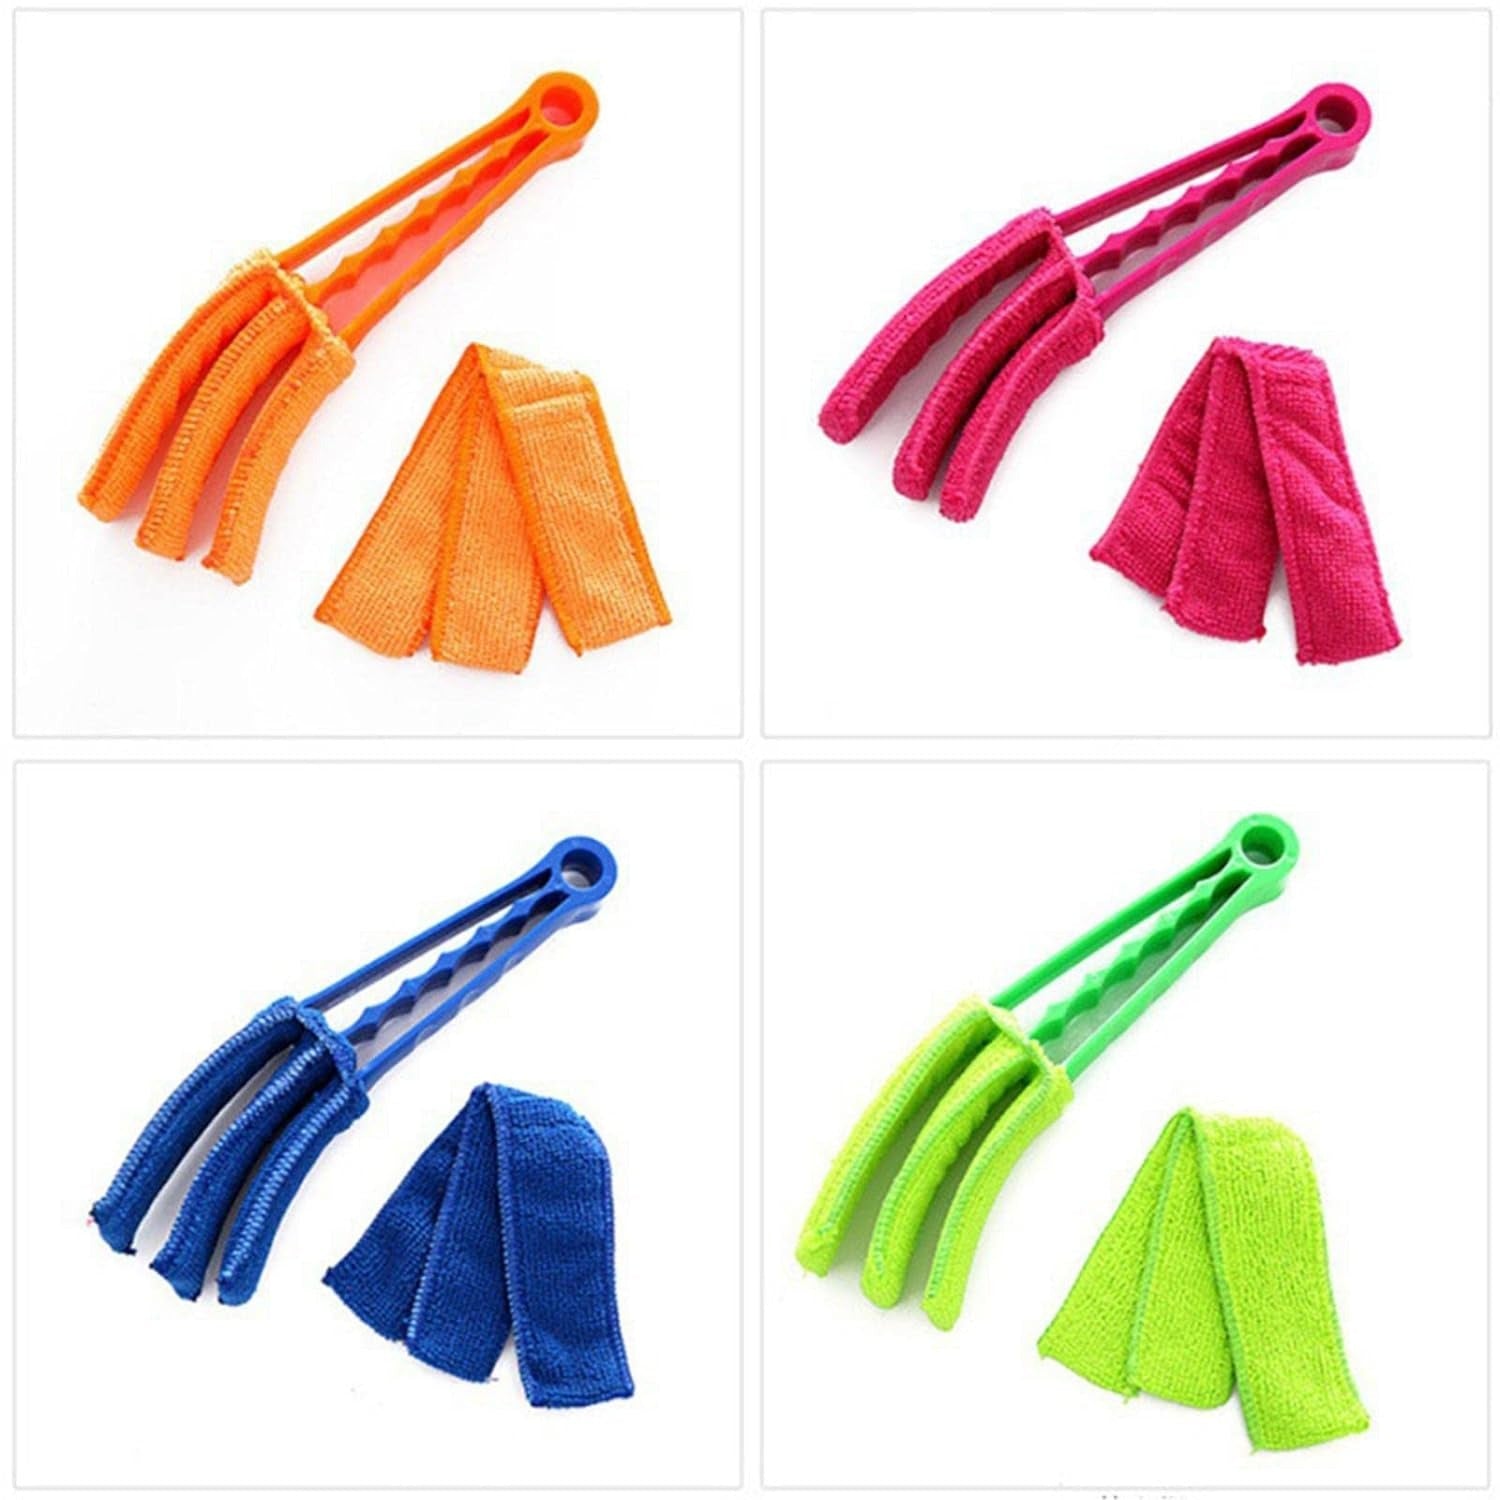 4 different colors of Microfiber Window Blinds Brush